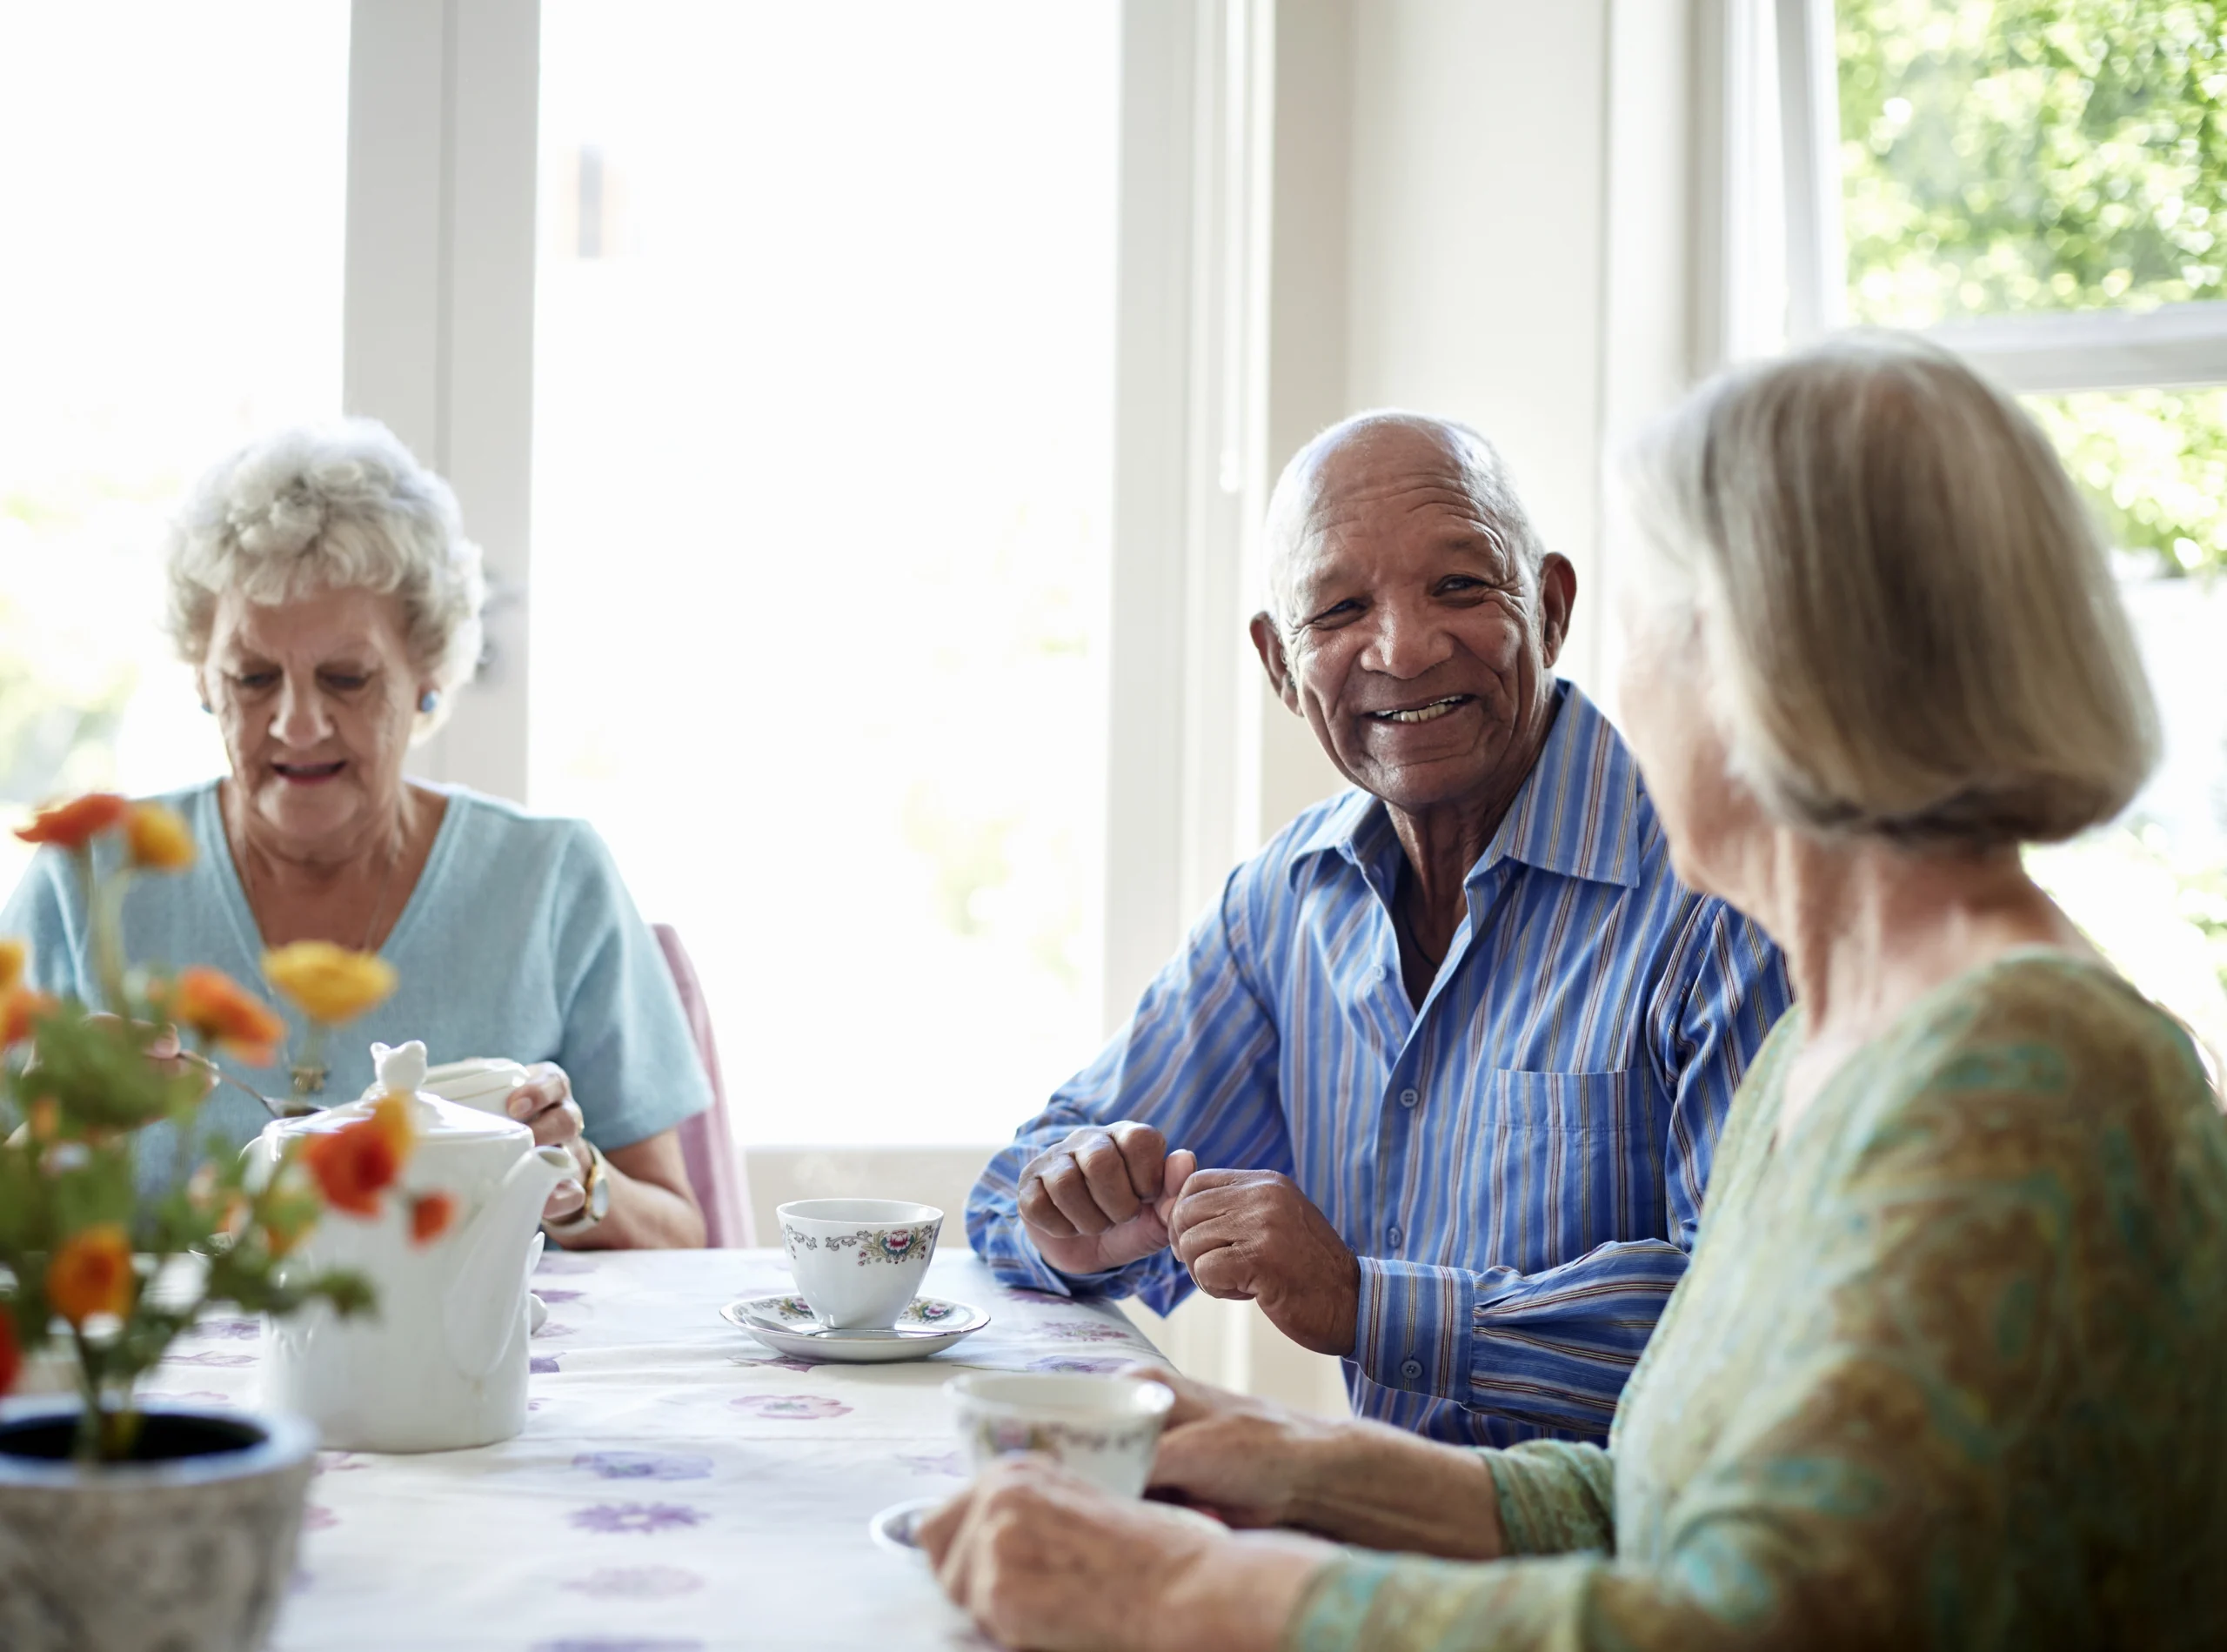 Group of senior citizens smiling and drinking tea